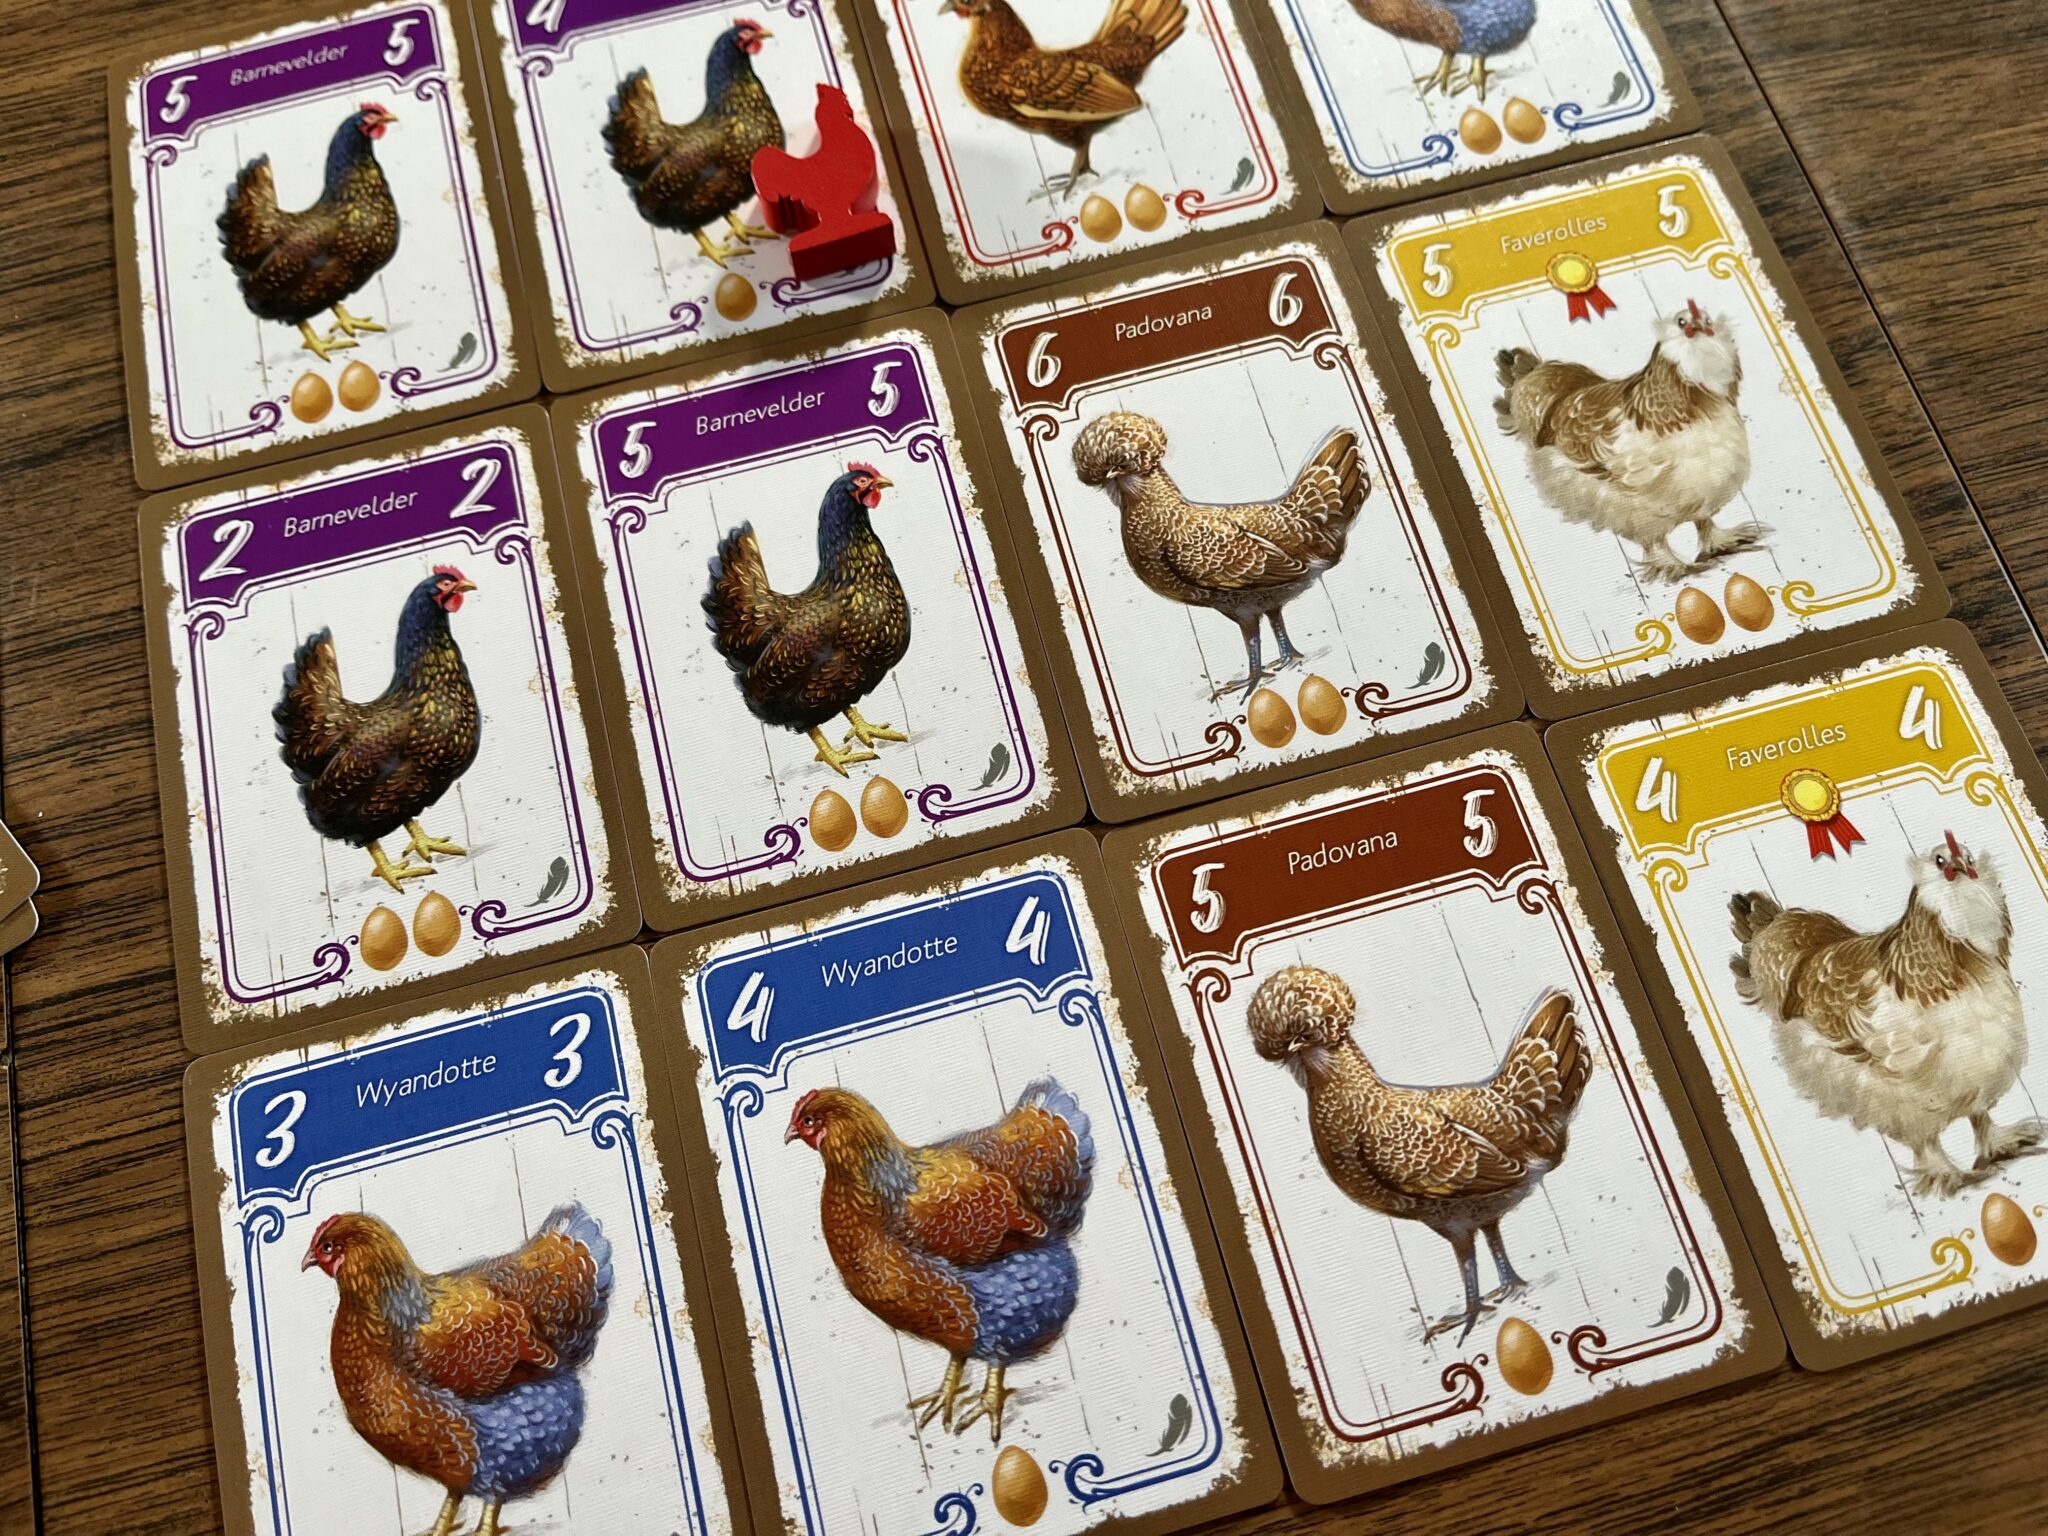 Hens on a player's personal grid